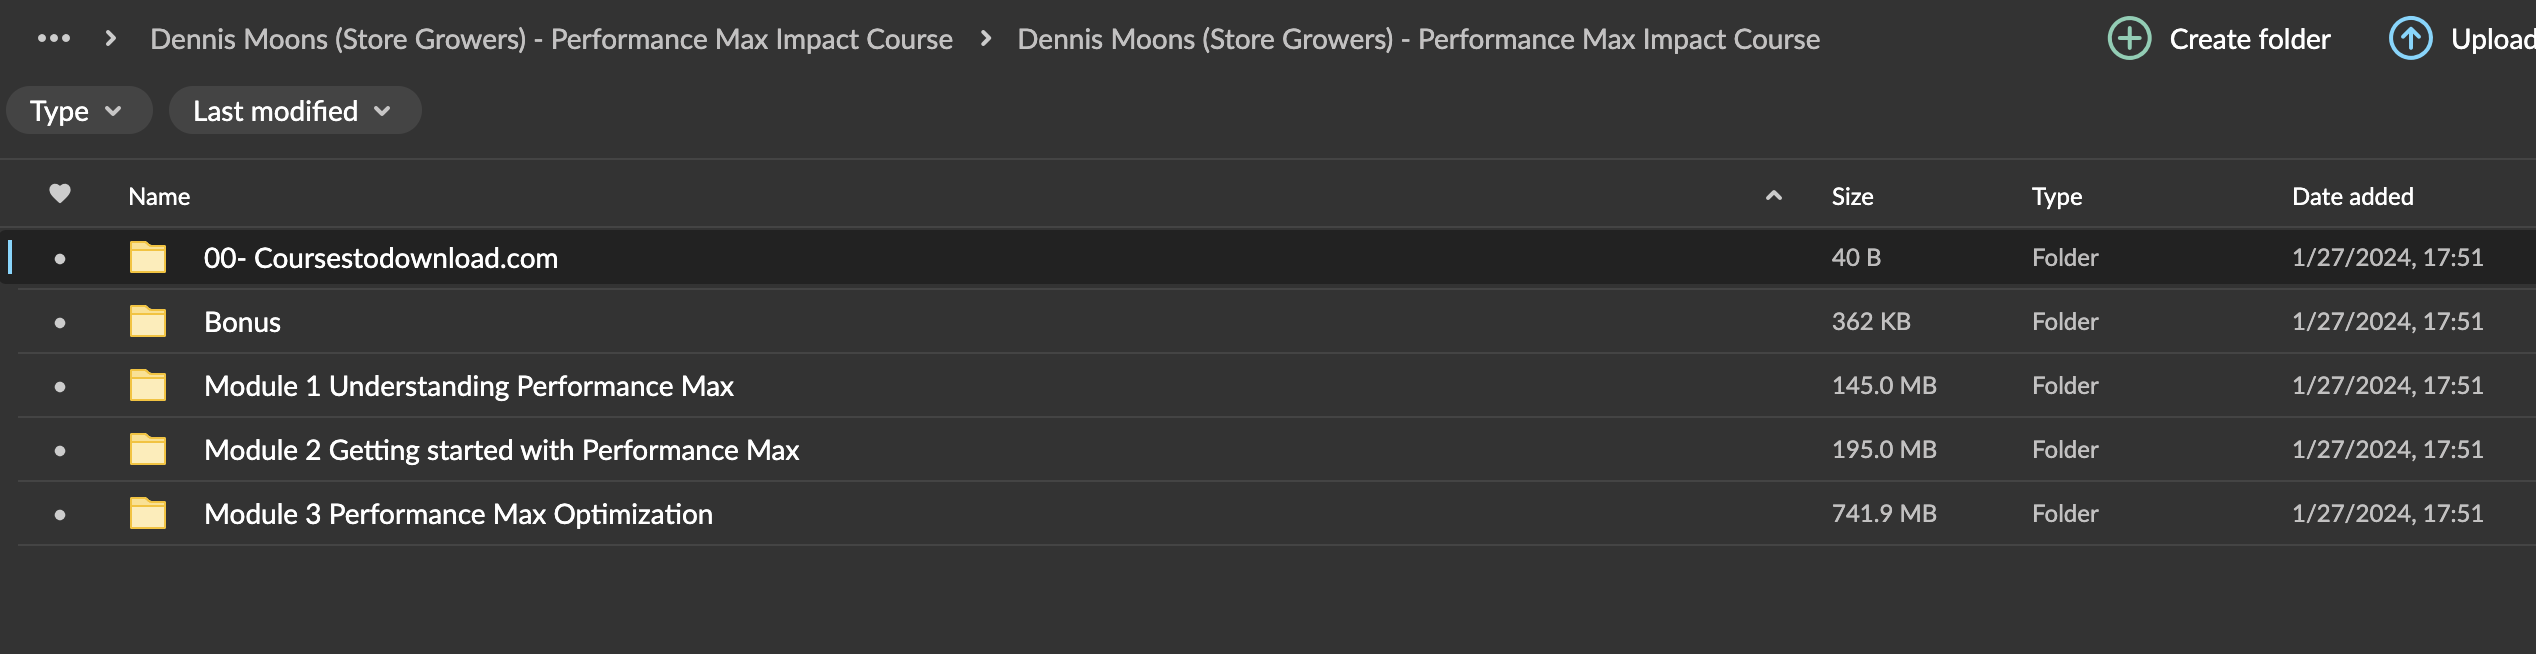 Dennis Moons (Store Growers) - Performance Max Impact Course Download